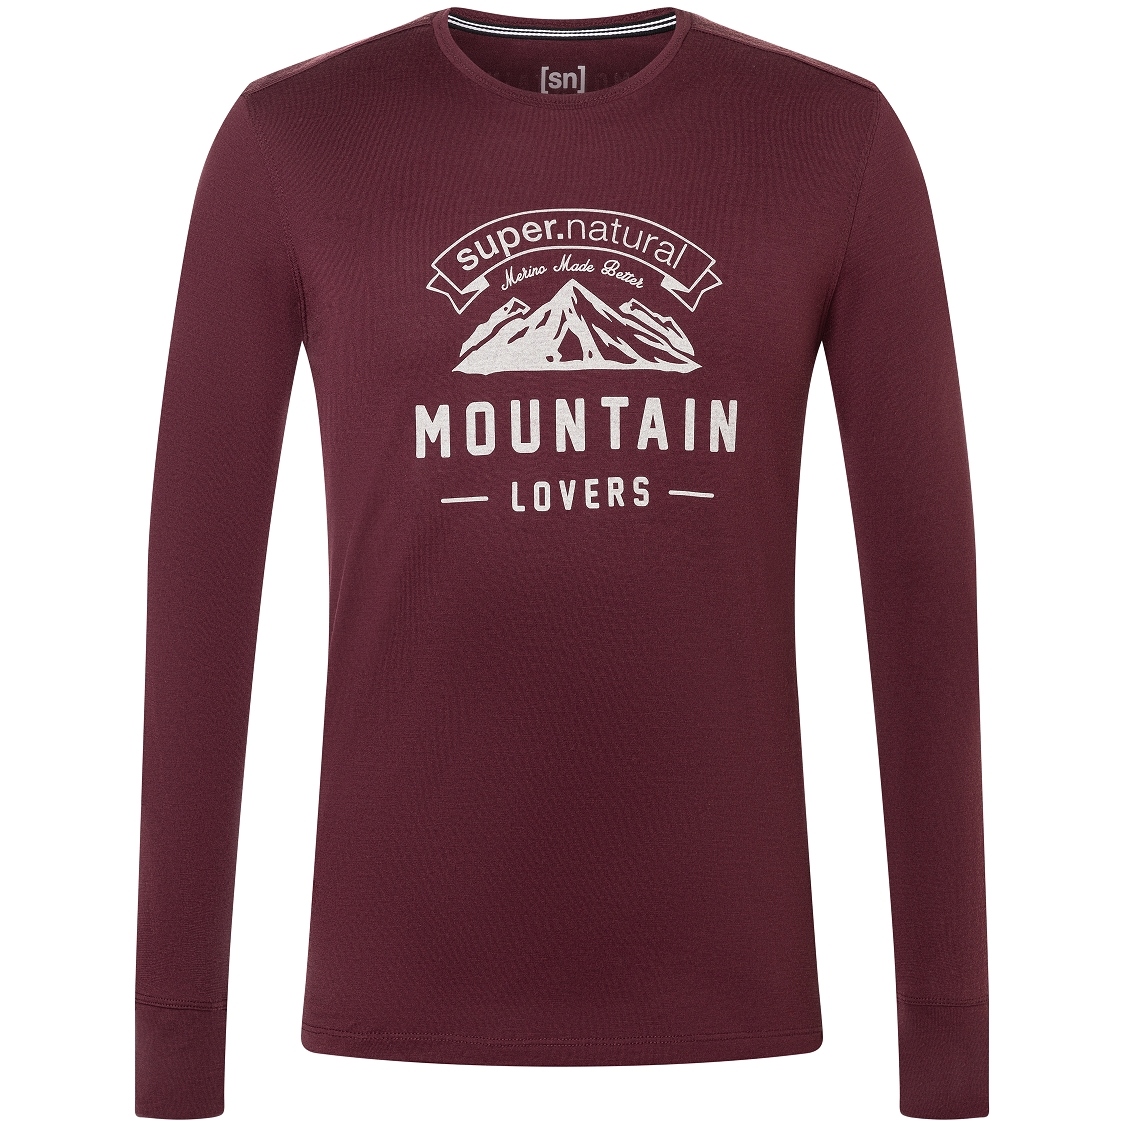 Image of SUPER.NATURAL Mountain Lovers Longsleeve Men - Wine Tasting/Feather Grey